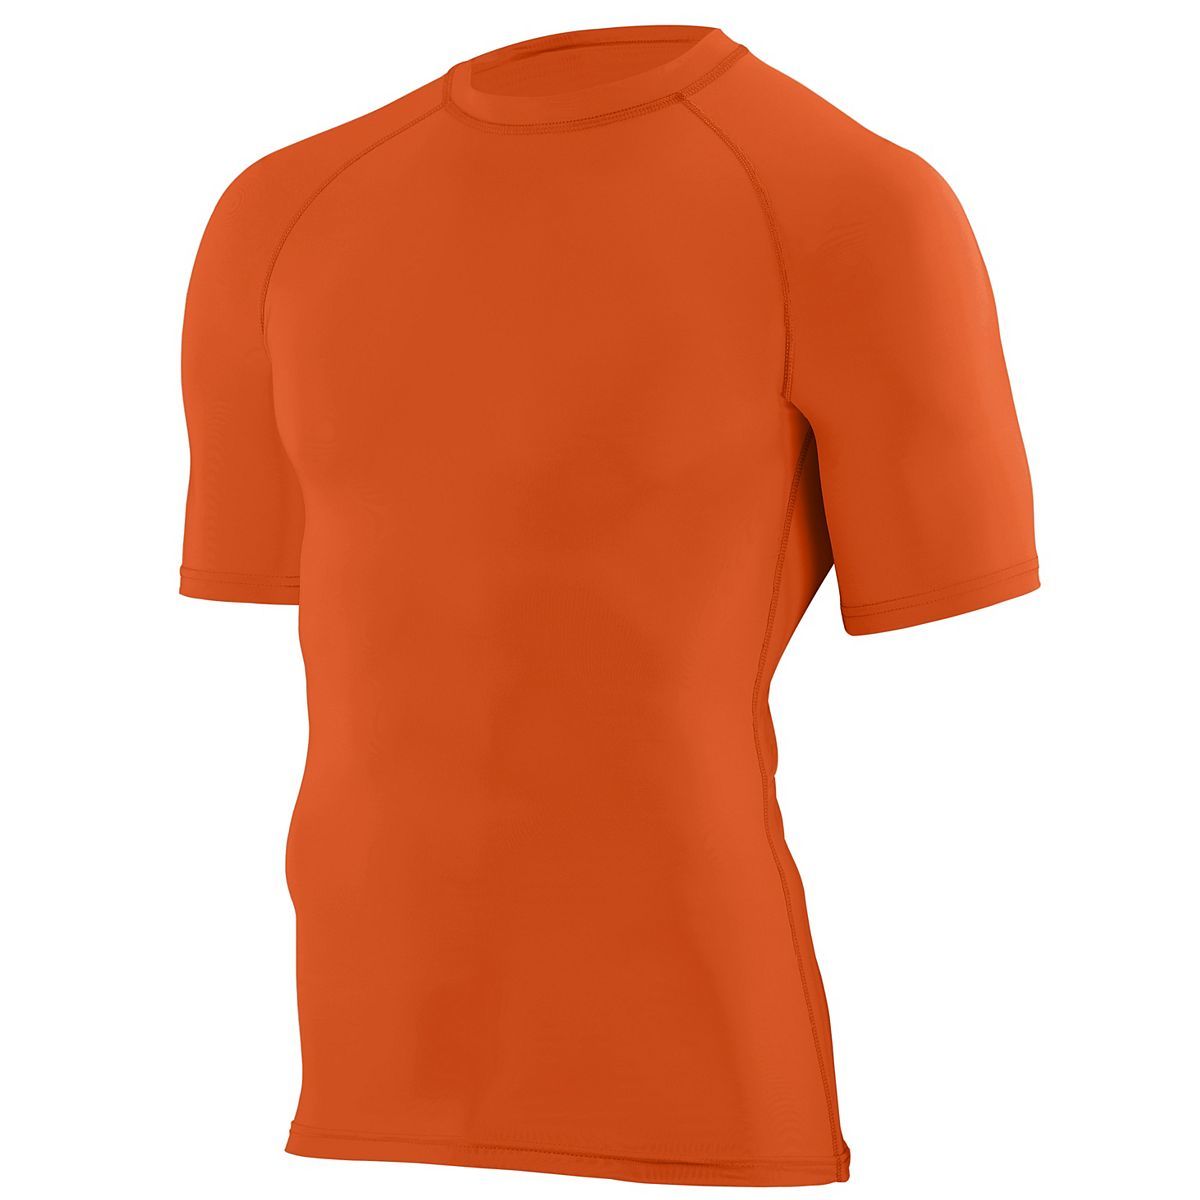 Youth Hyperform Compression Short Sleeve Tee - 2601